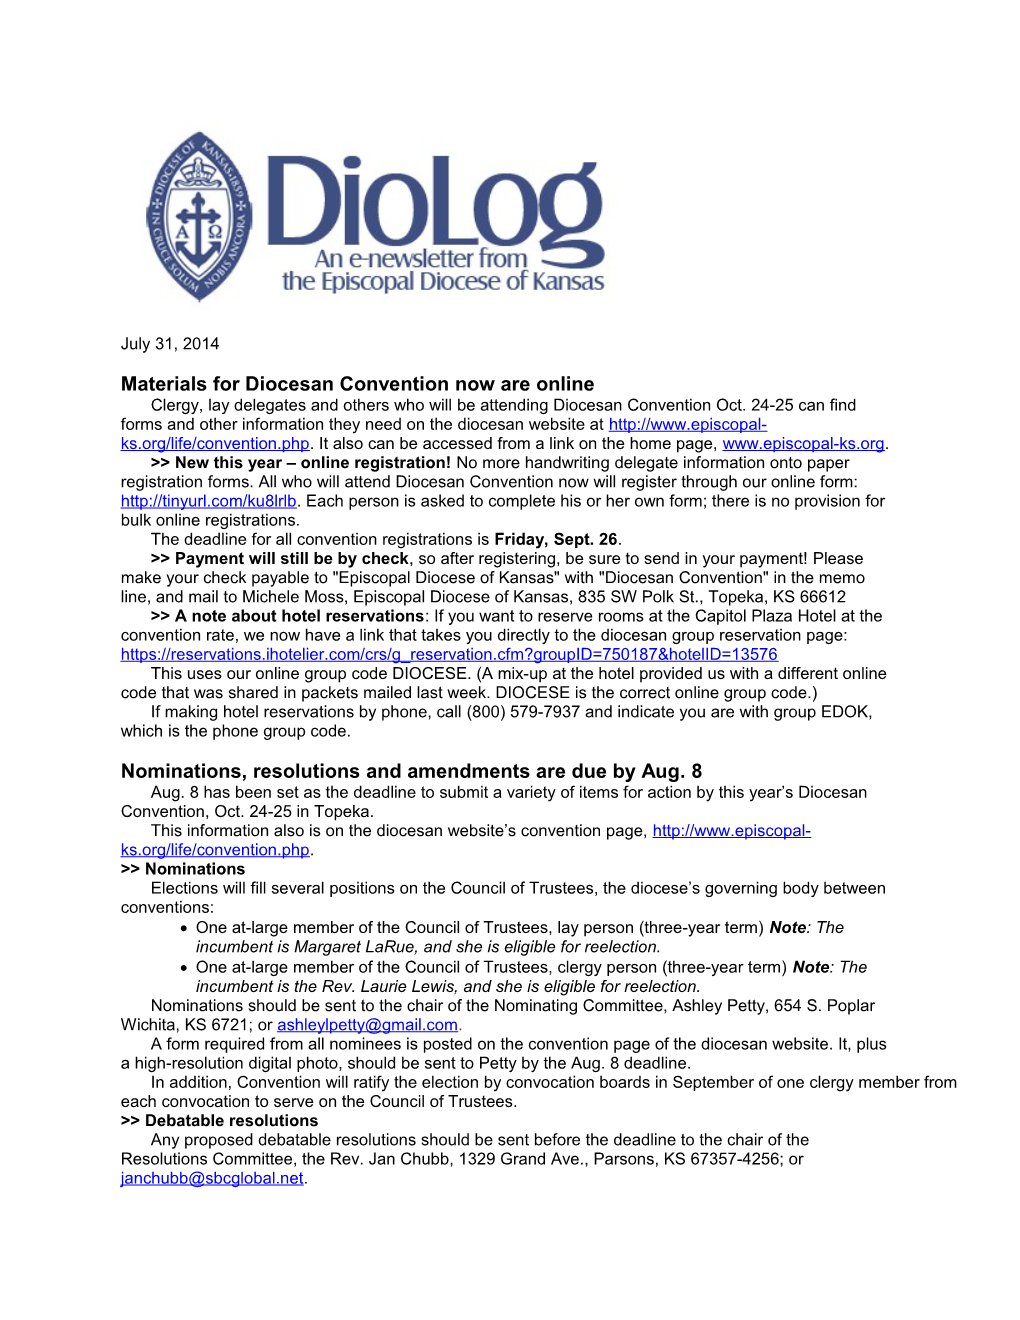 Materials for Diocesan Convention Now Are Online